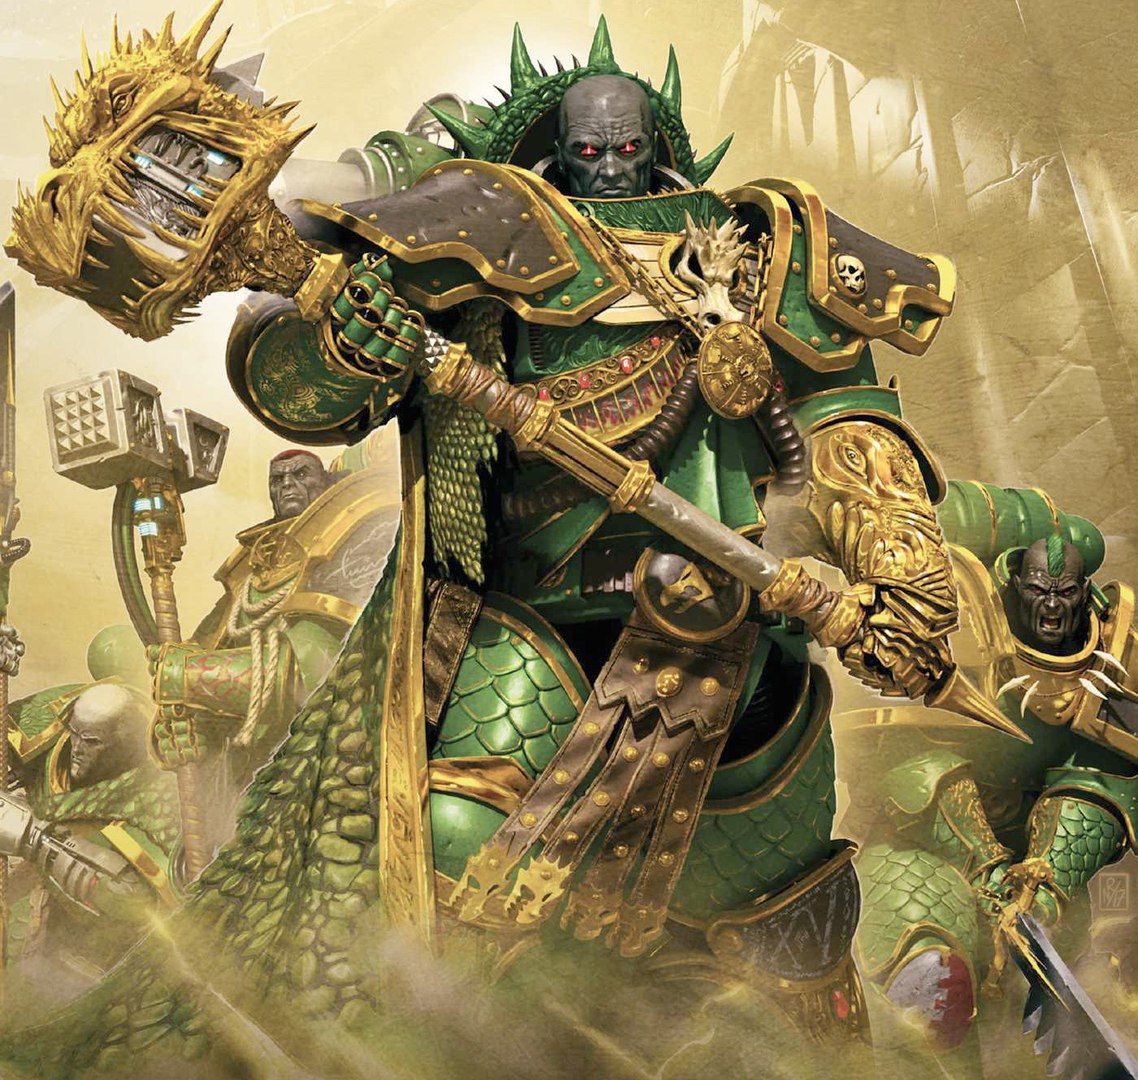 Can you explain the character of Vulkan in Warhammer 40k?